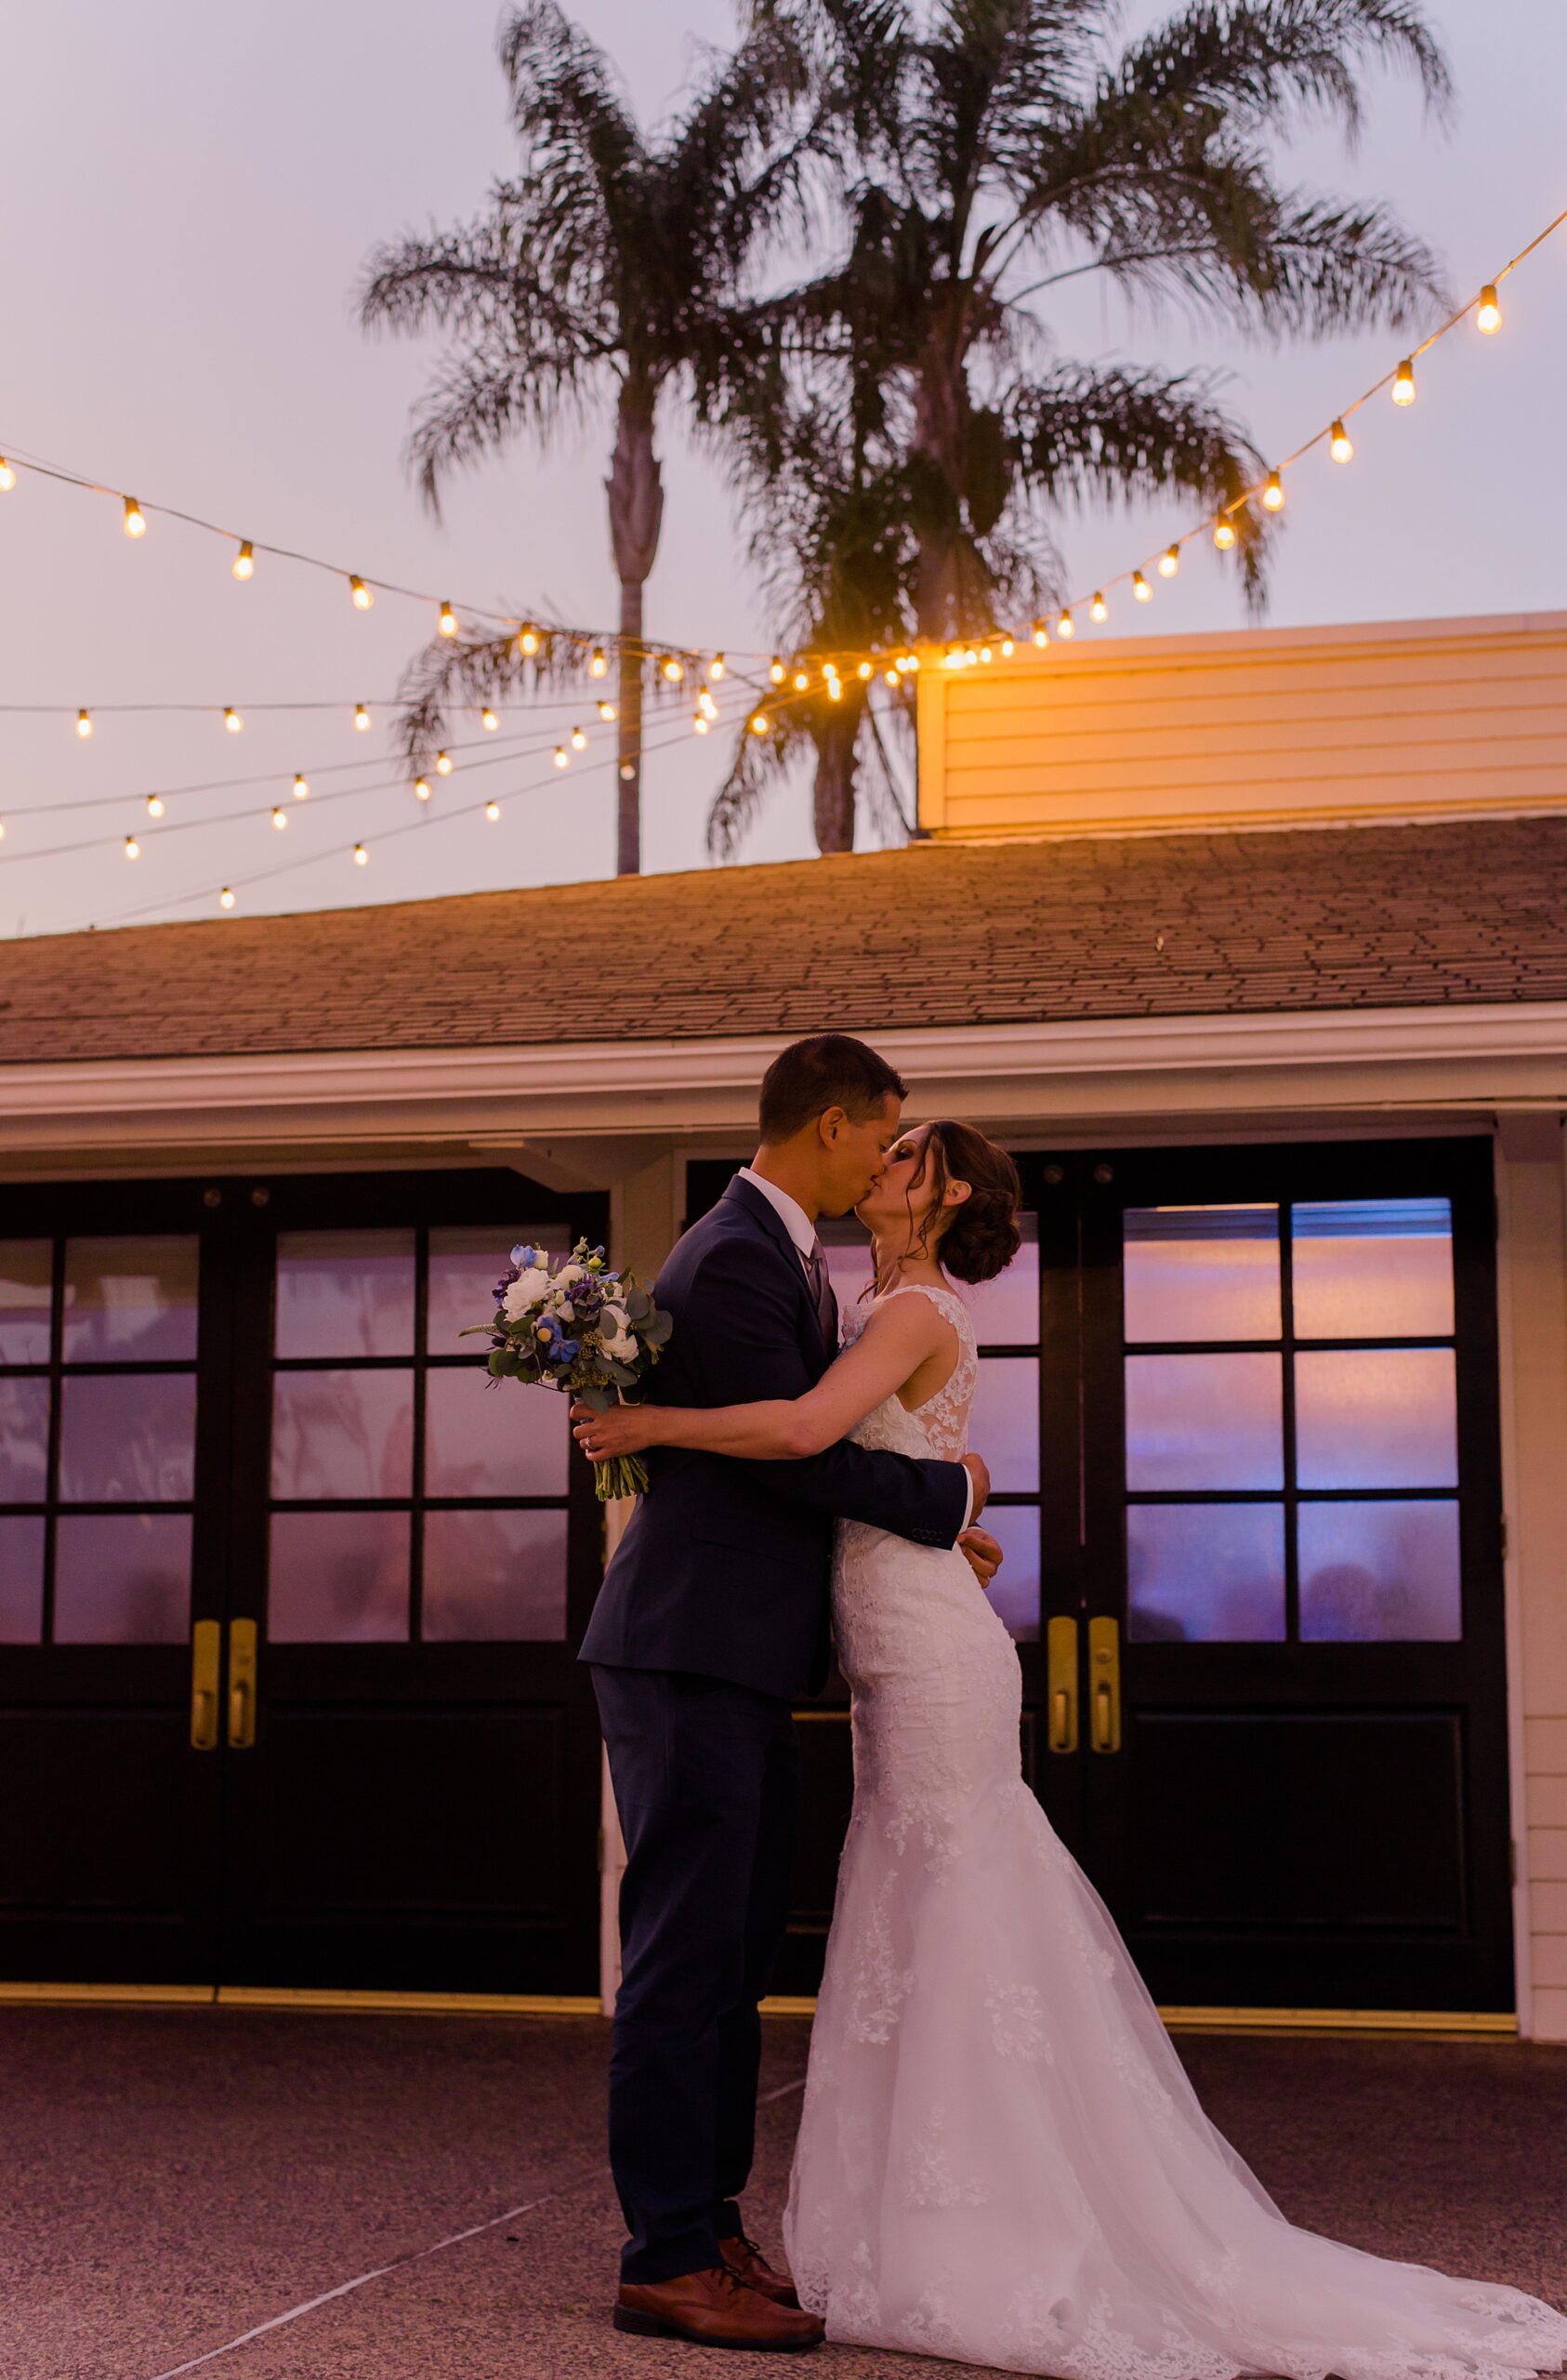 newlyweds kiss under the twinkling lights and evening sky